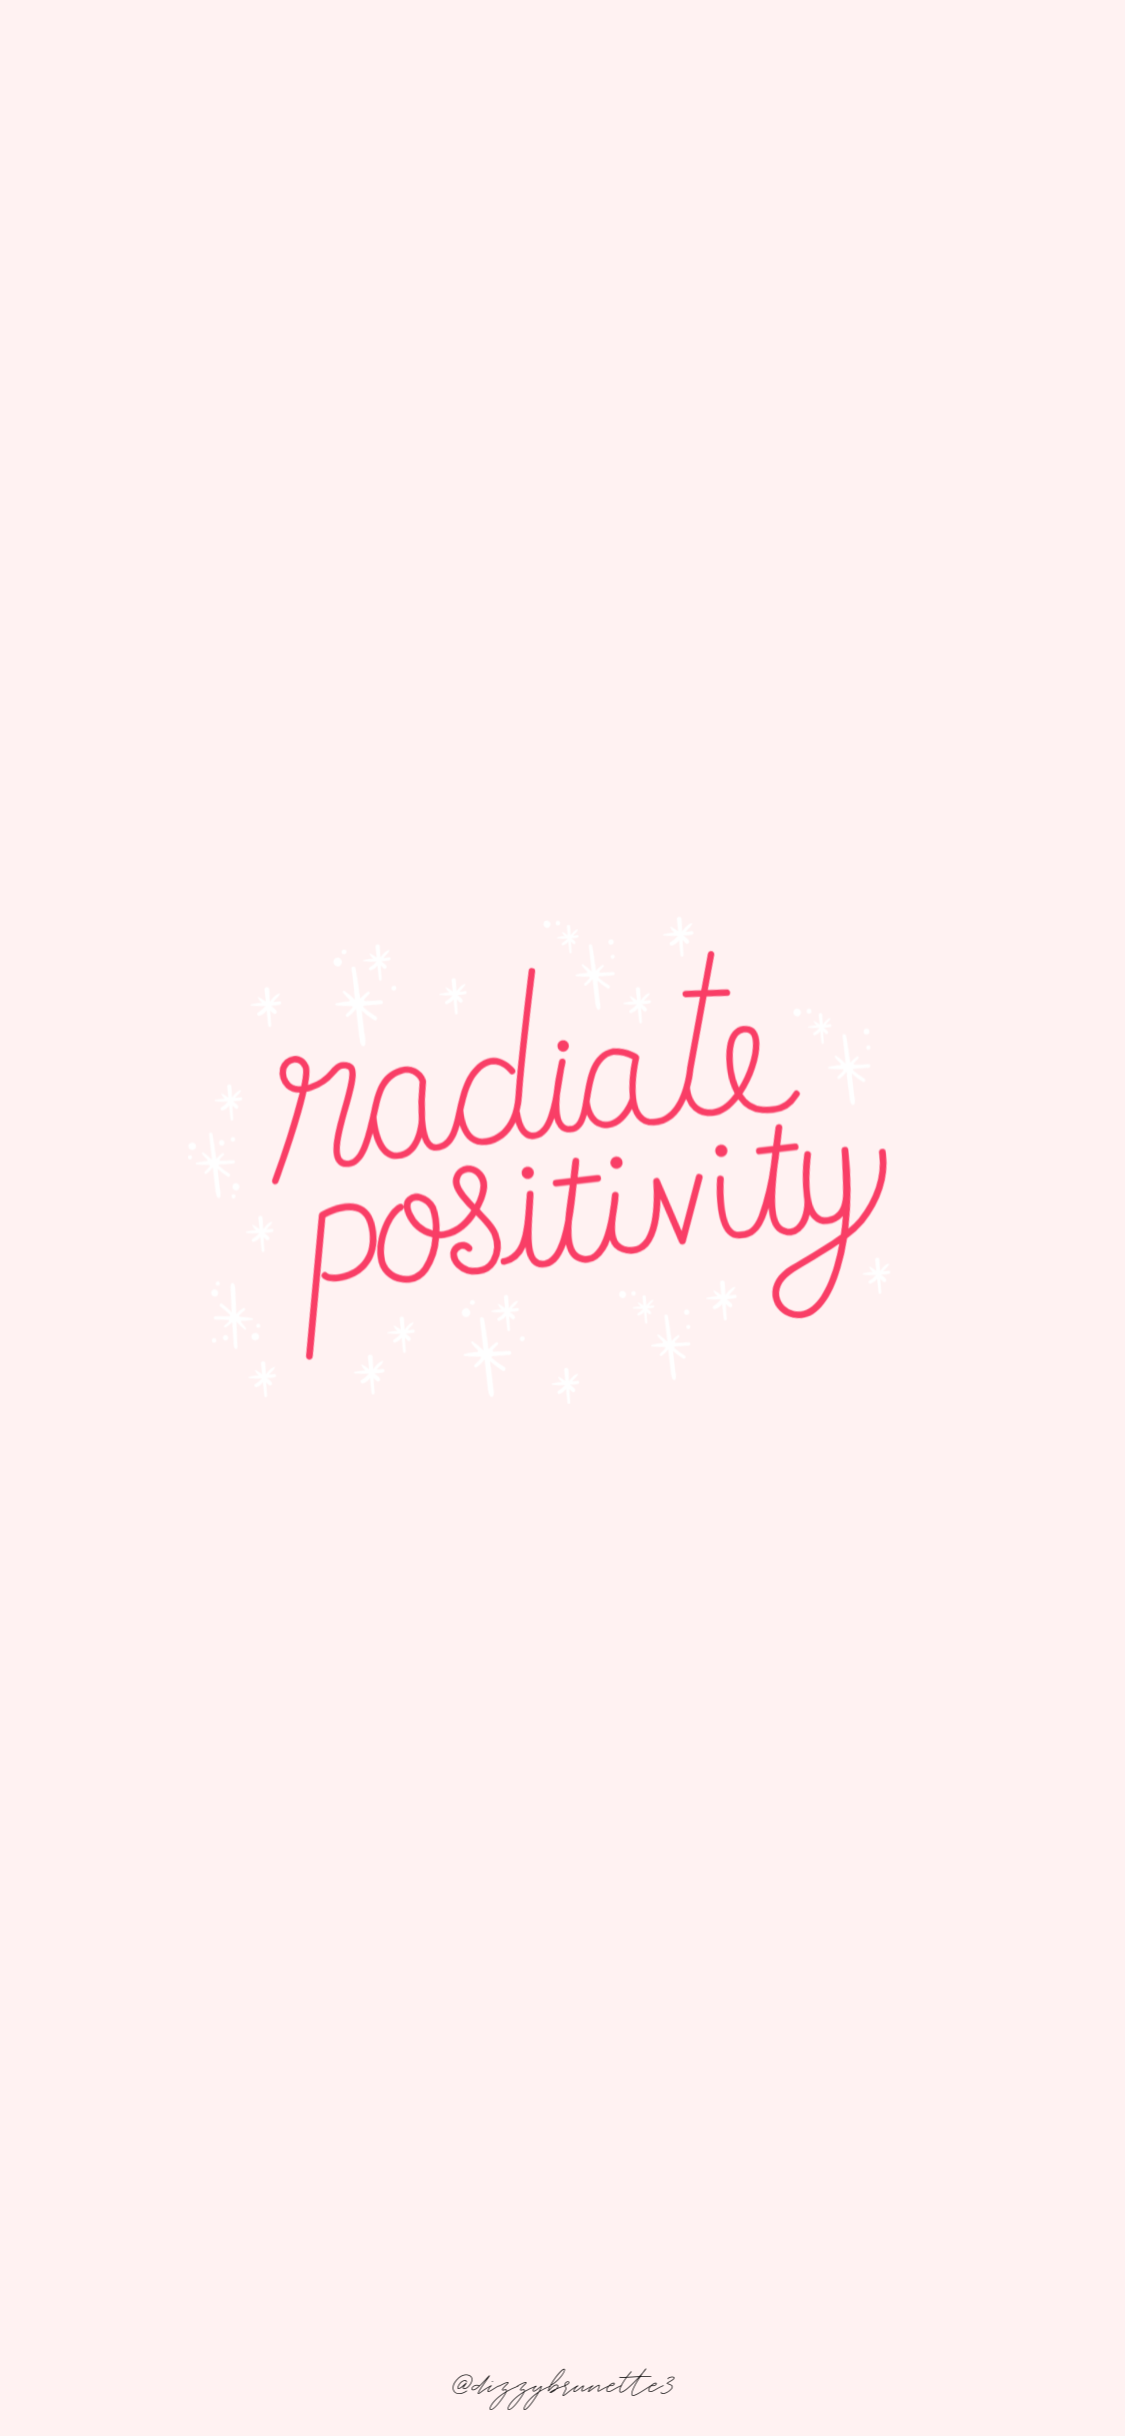 Positive Energy Iphone Wallpapers